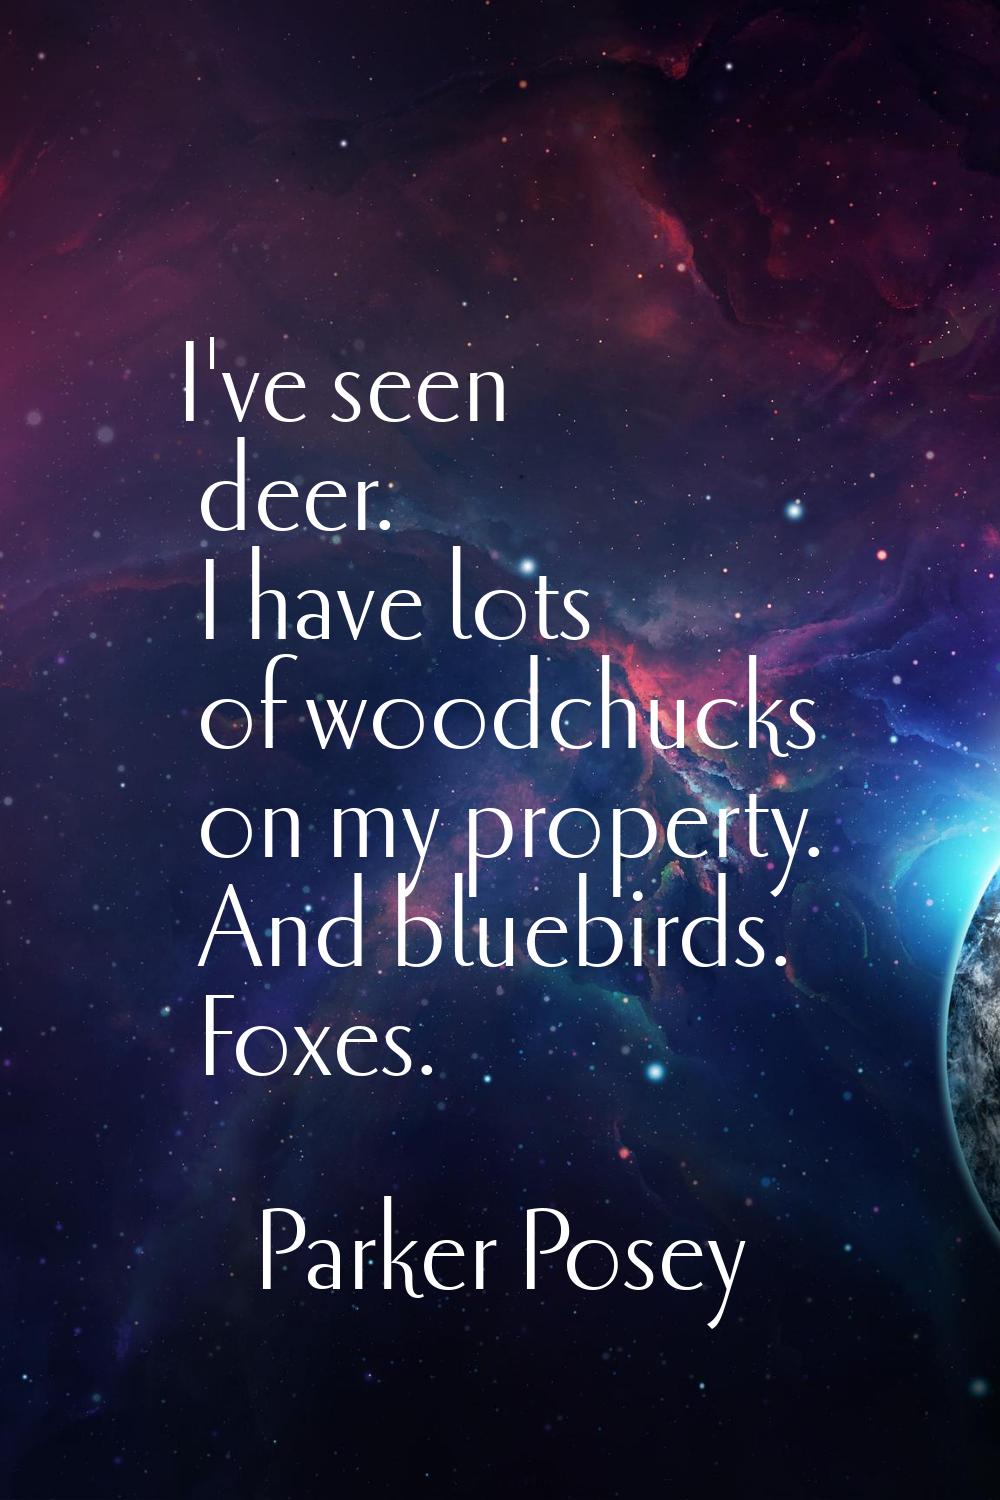 I've seen deer. I have lots of woodchucks on my property. And bluebirds. Foxes.